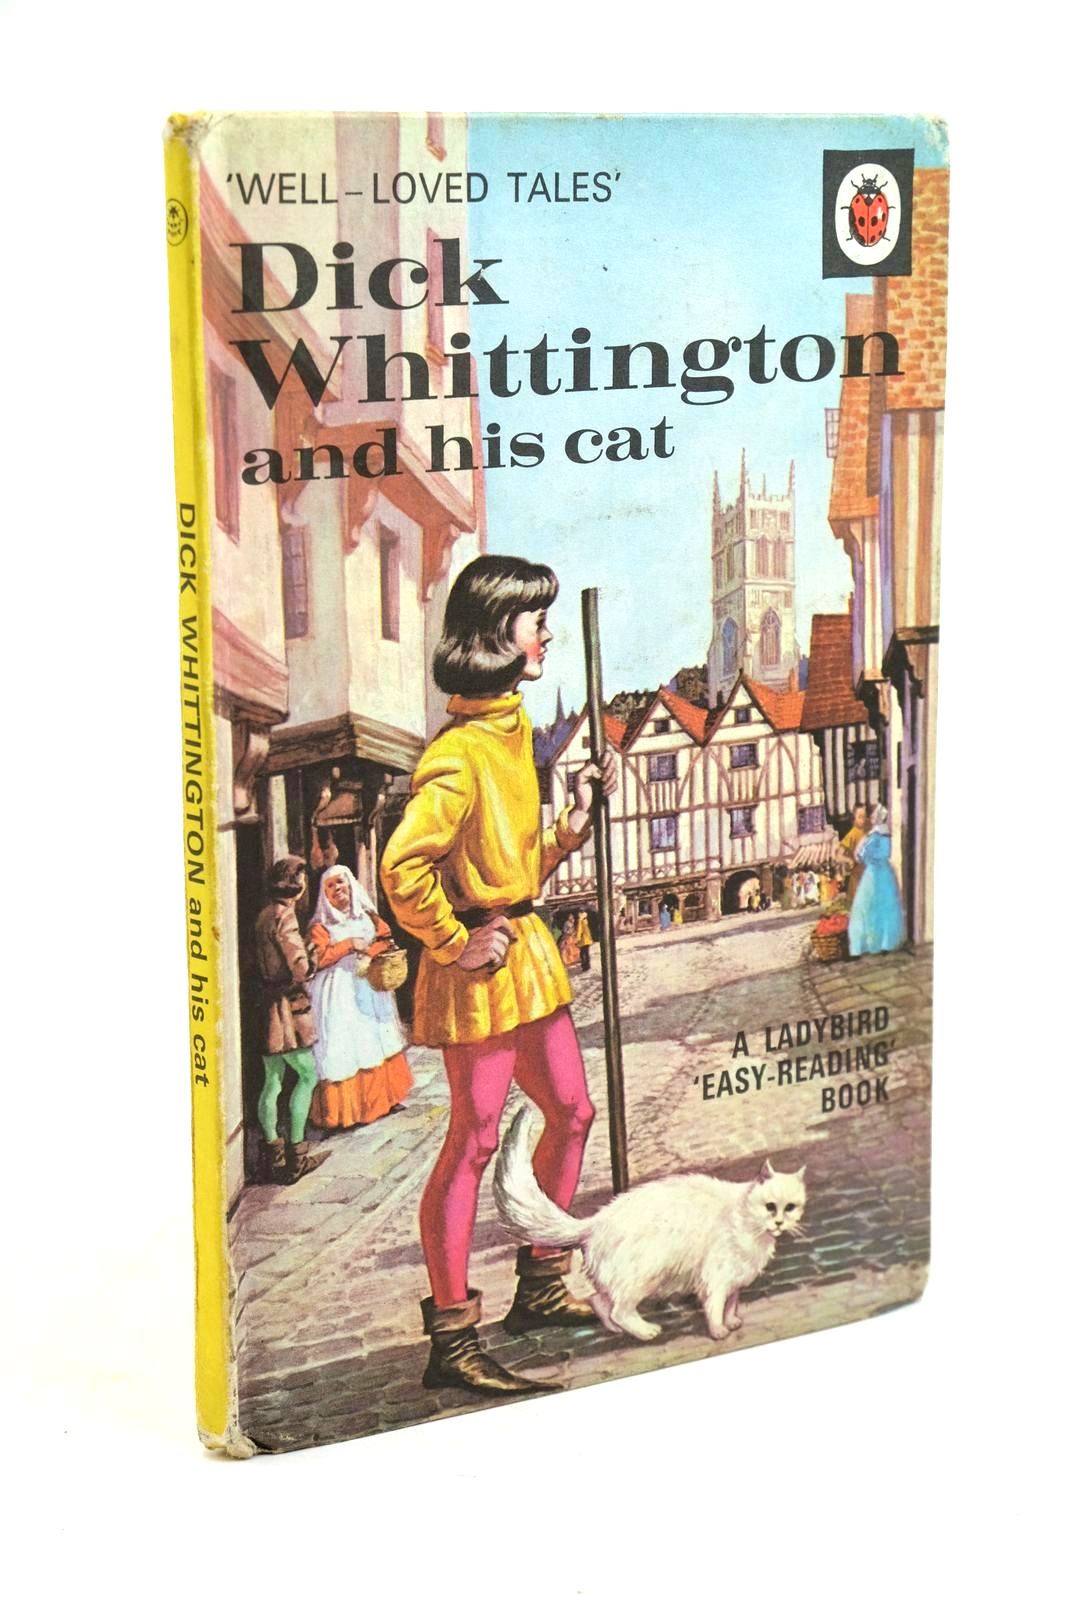 Photo of DICK WHITTINGTON AND HIS CAT written by Southgate, Vera illustrated by Winter, Eric published by Wills & Hepworth Ltd. (STOCK CODE: 1321460)  for sale by Stella & Rose's Books